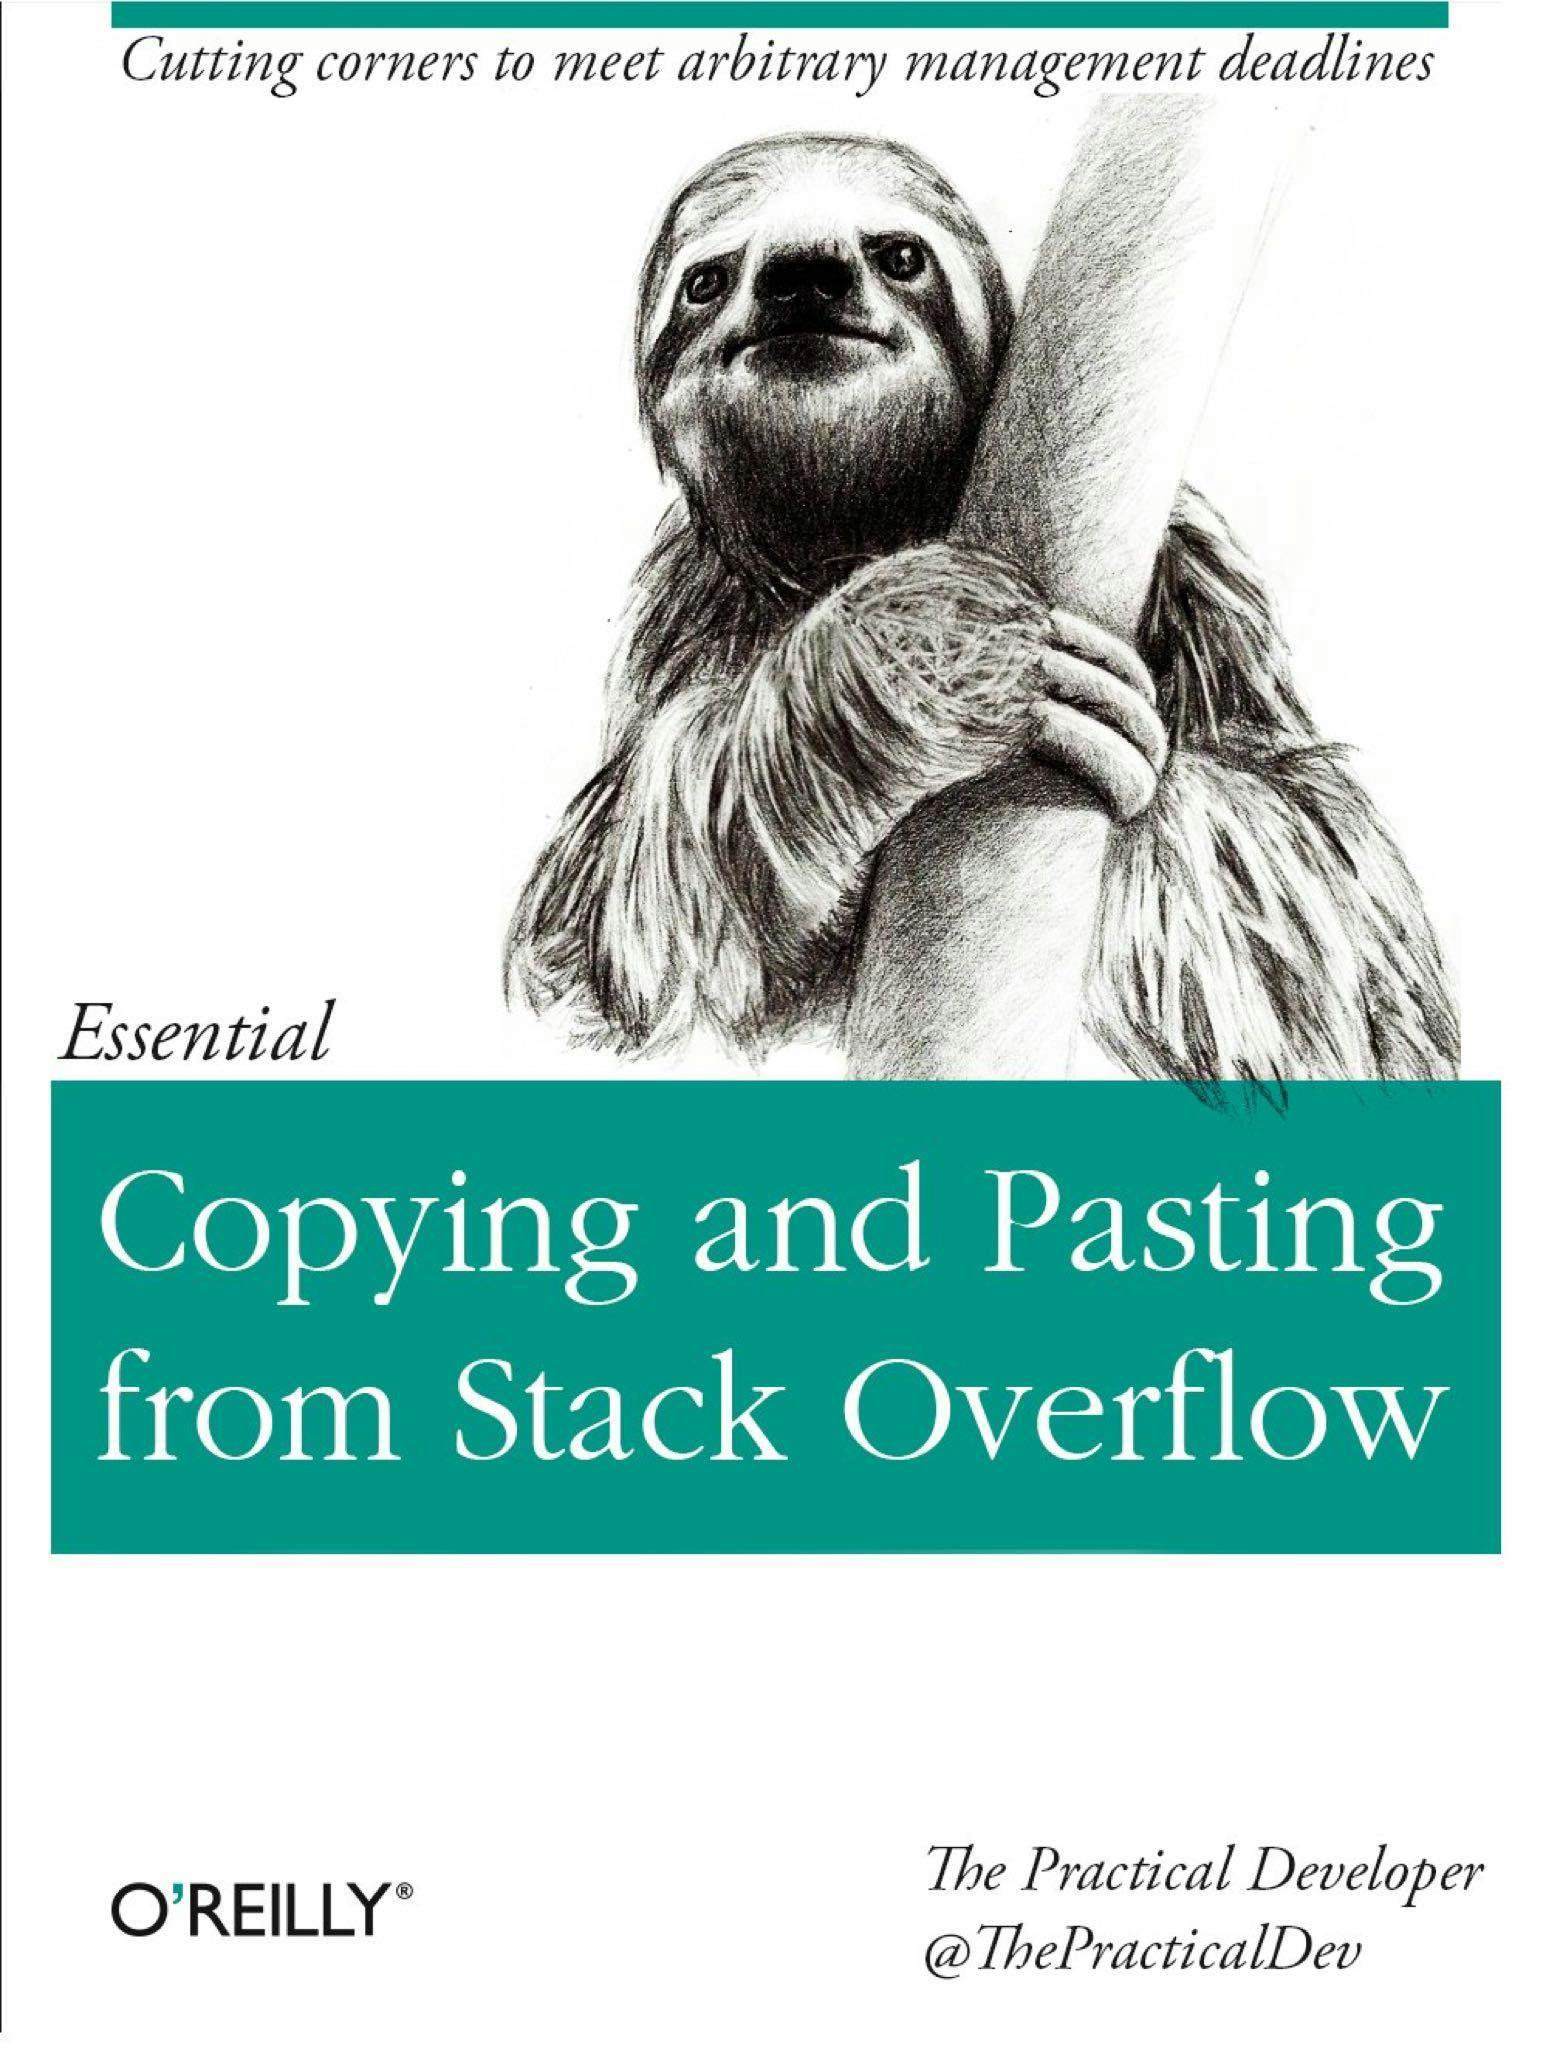 Copying and Pasting from Stack Overflow | Cutting corners to meet arbitrary management deadlines